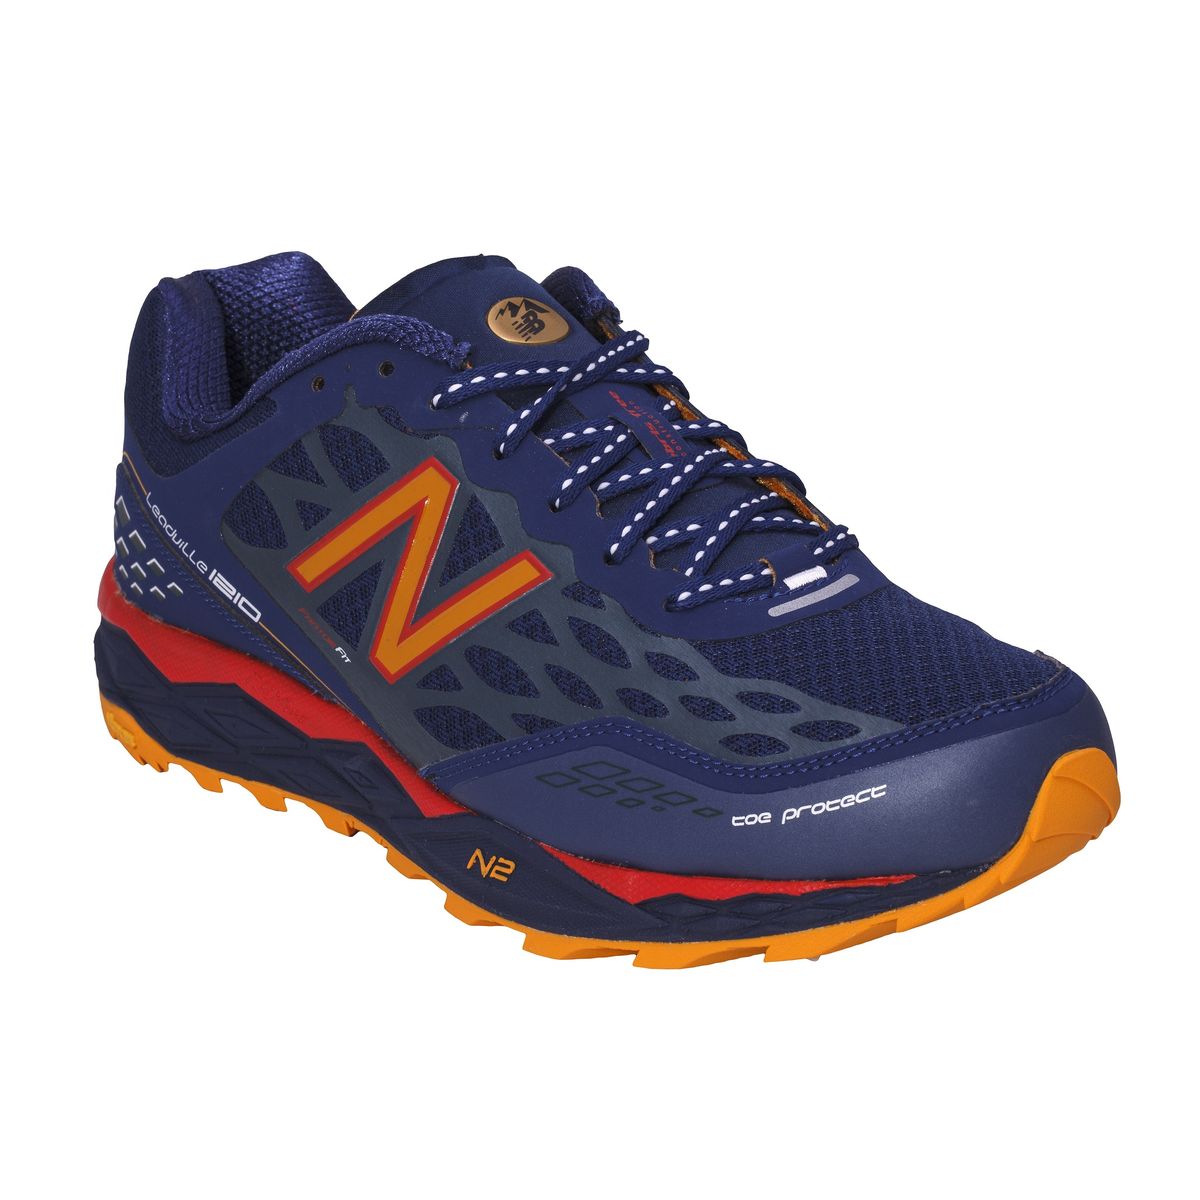 new balance online store south africa